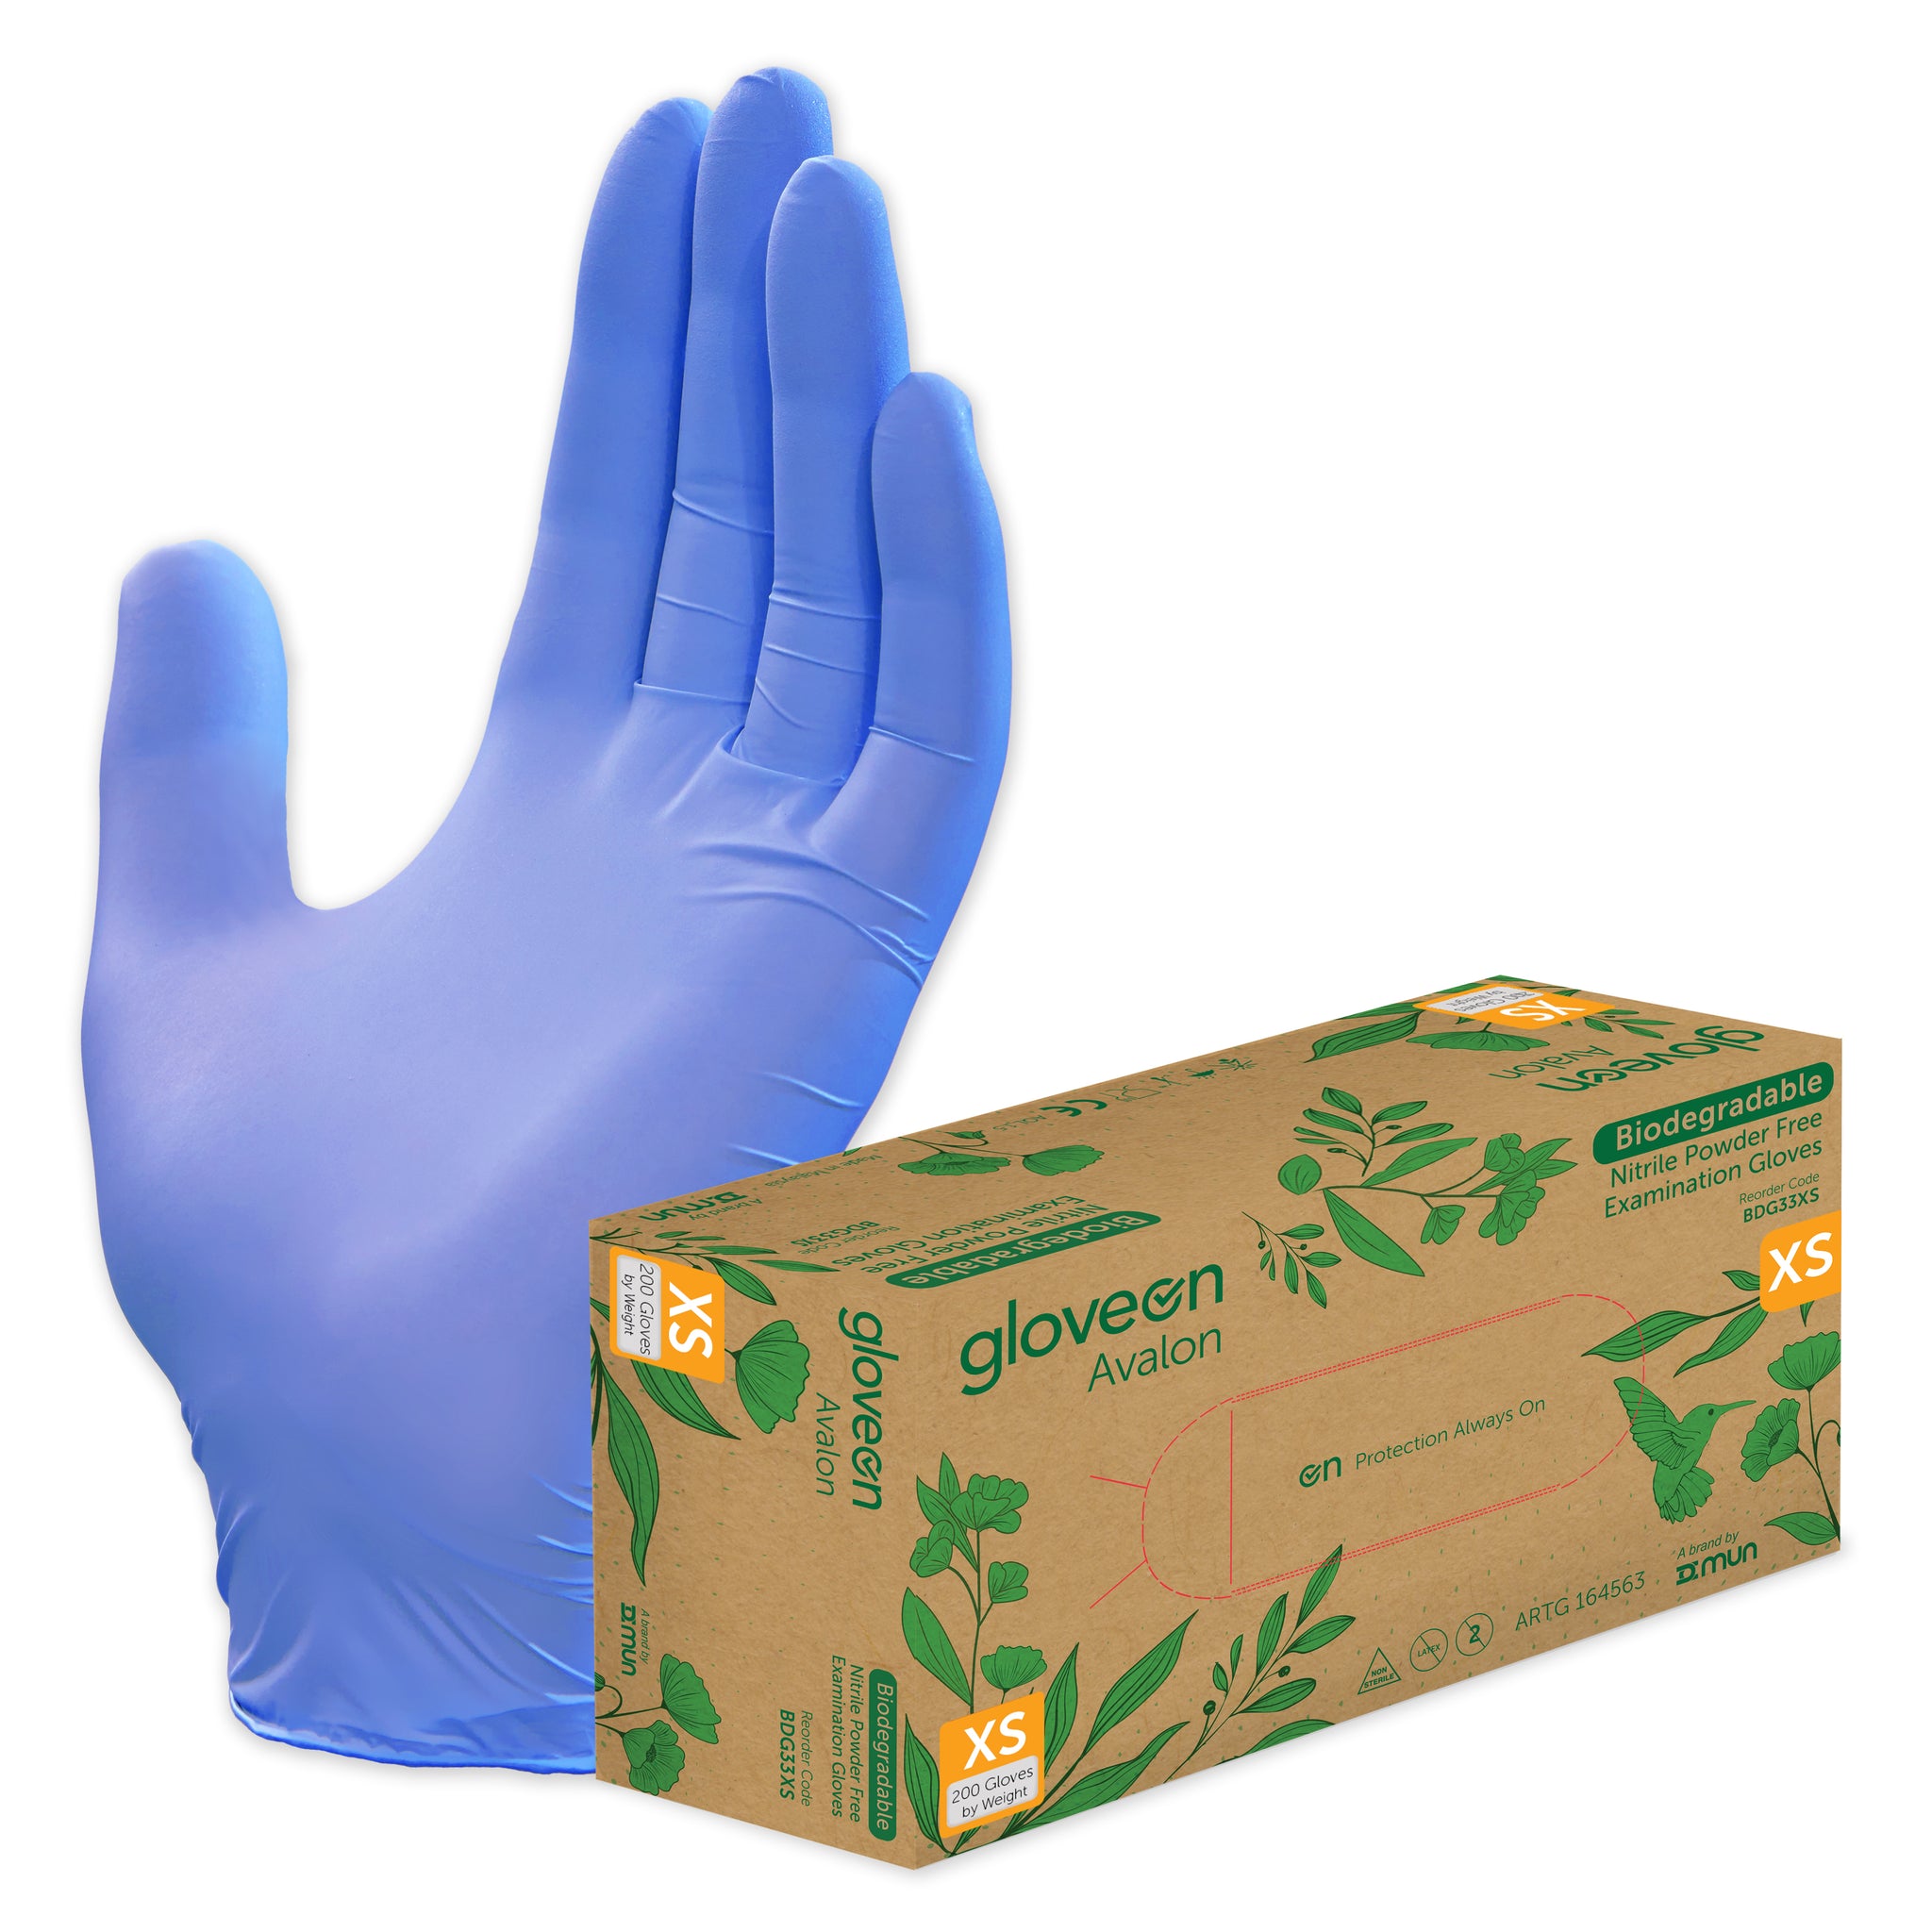 Biodegradable Nitrile Exam Gloves, Powder Free, Non-Sterile, Fingertip Textured, Standard Cuff, Violet Blue- Box of 200, XS